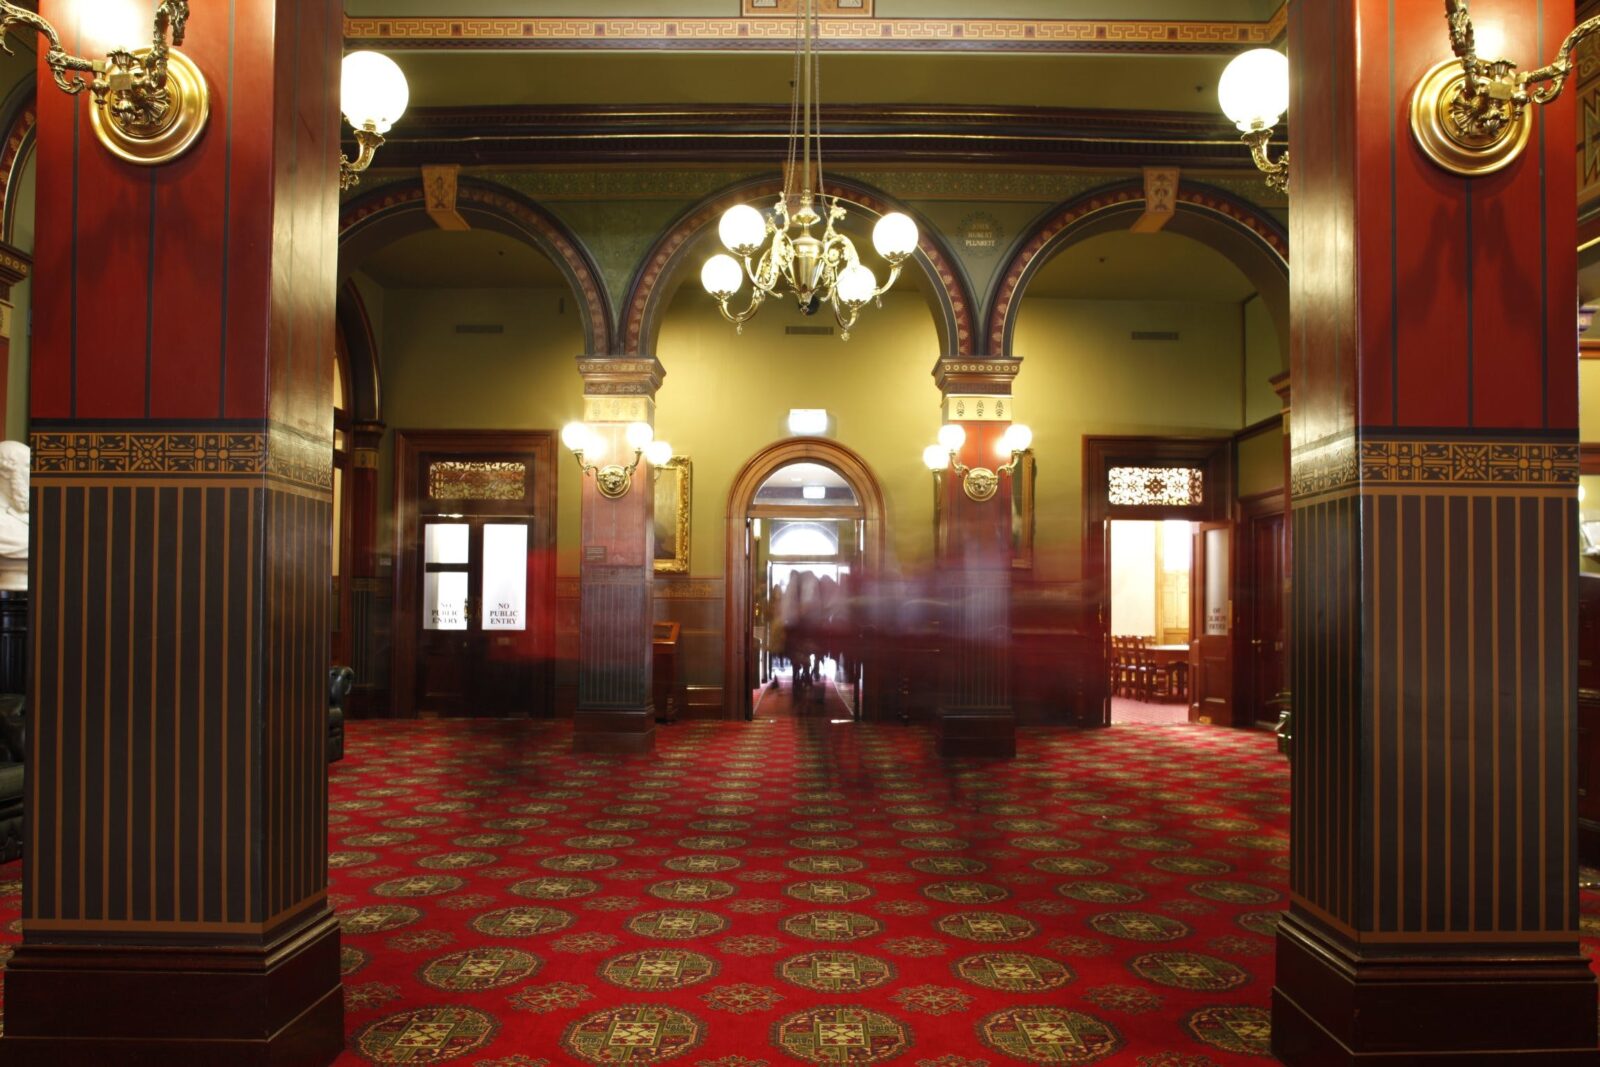 The entrance to the historic NSW Parliament Legislative Assembly foyer